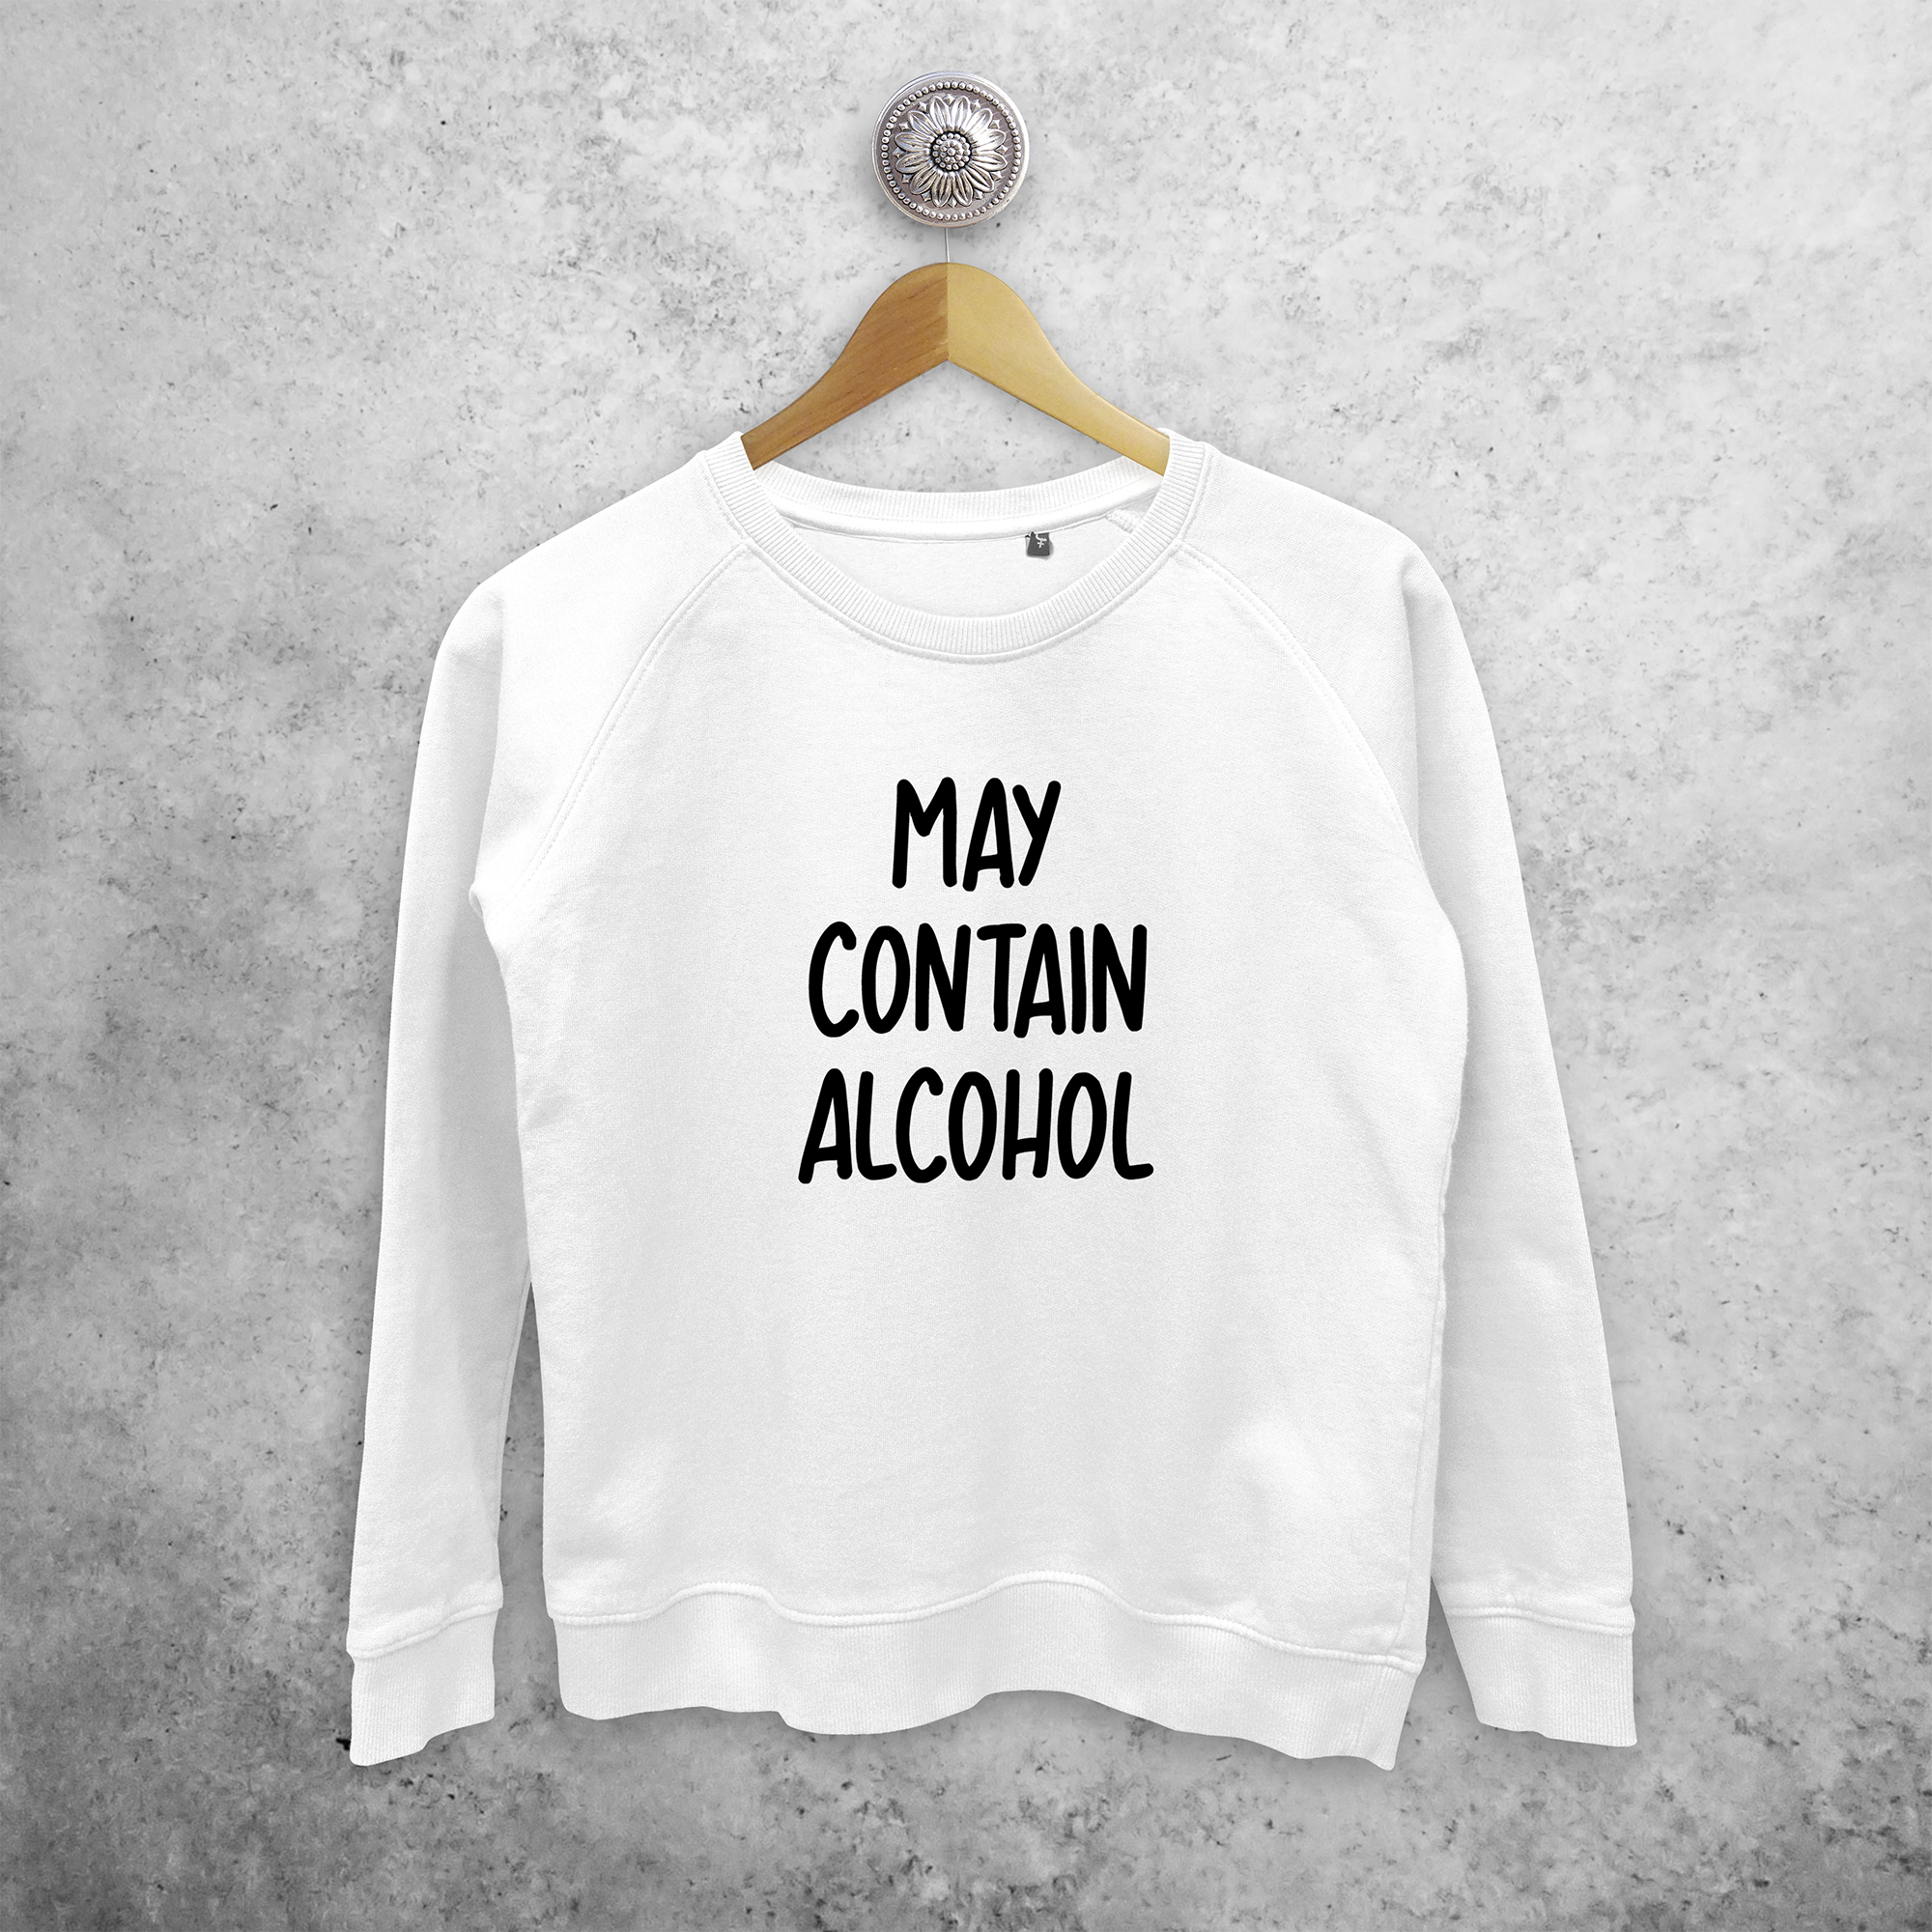 'May contain alohol' sweater